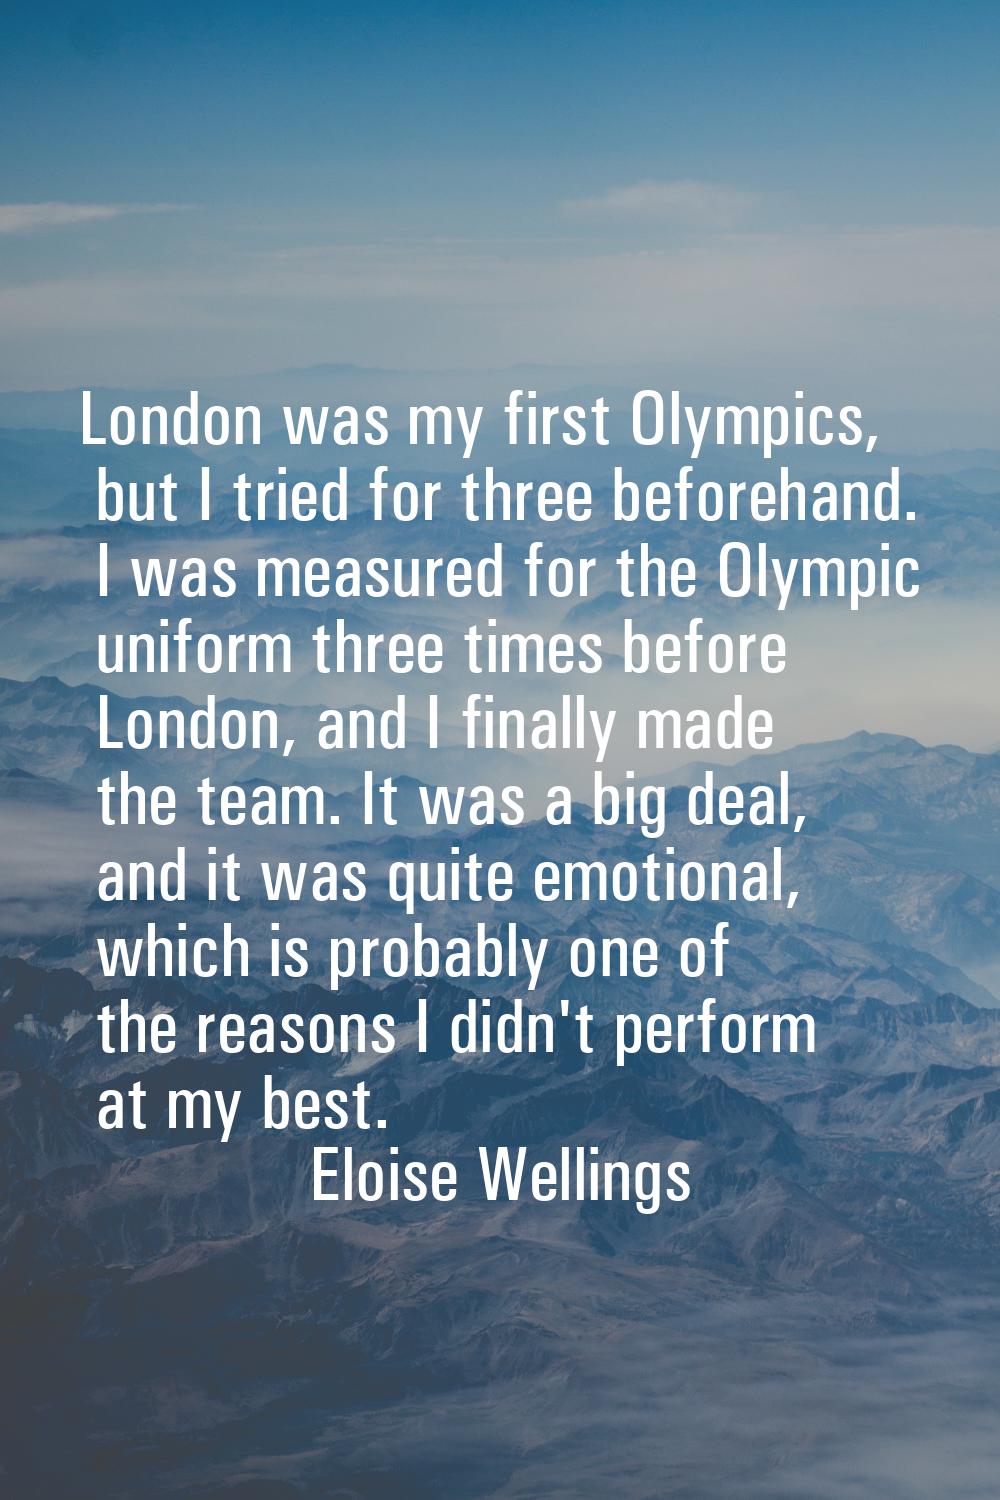 London was my first Olympics, but I tried for three beforehand. I was measured for the Olympic unif